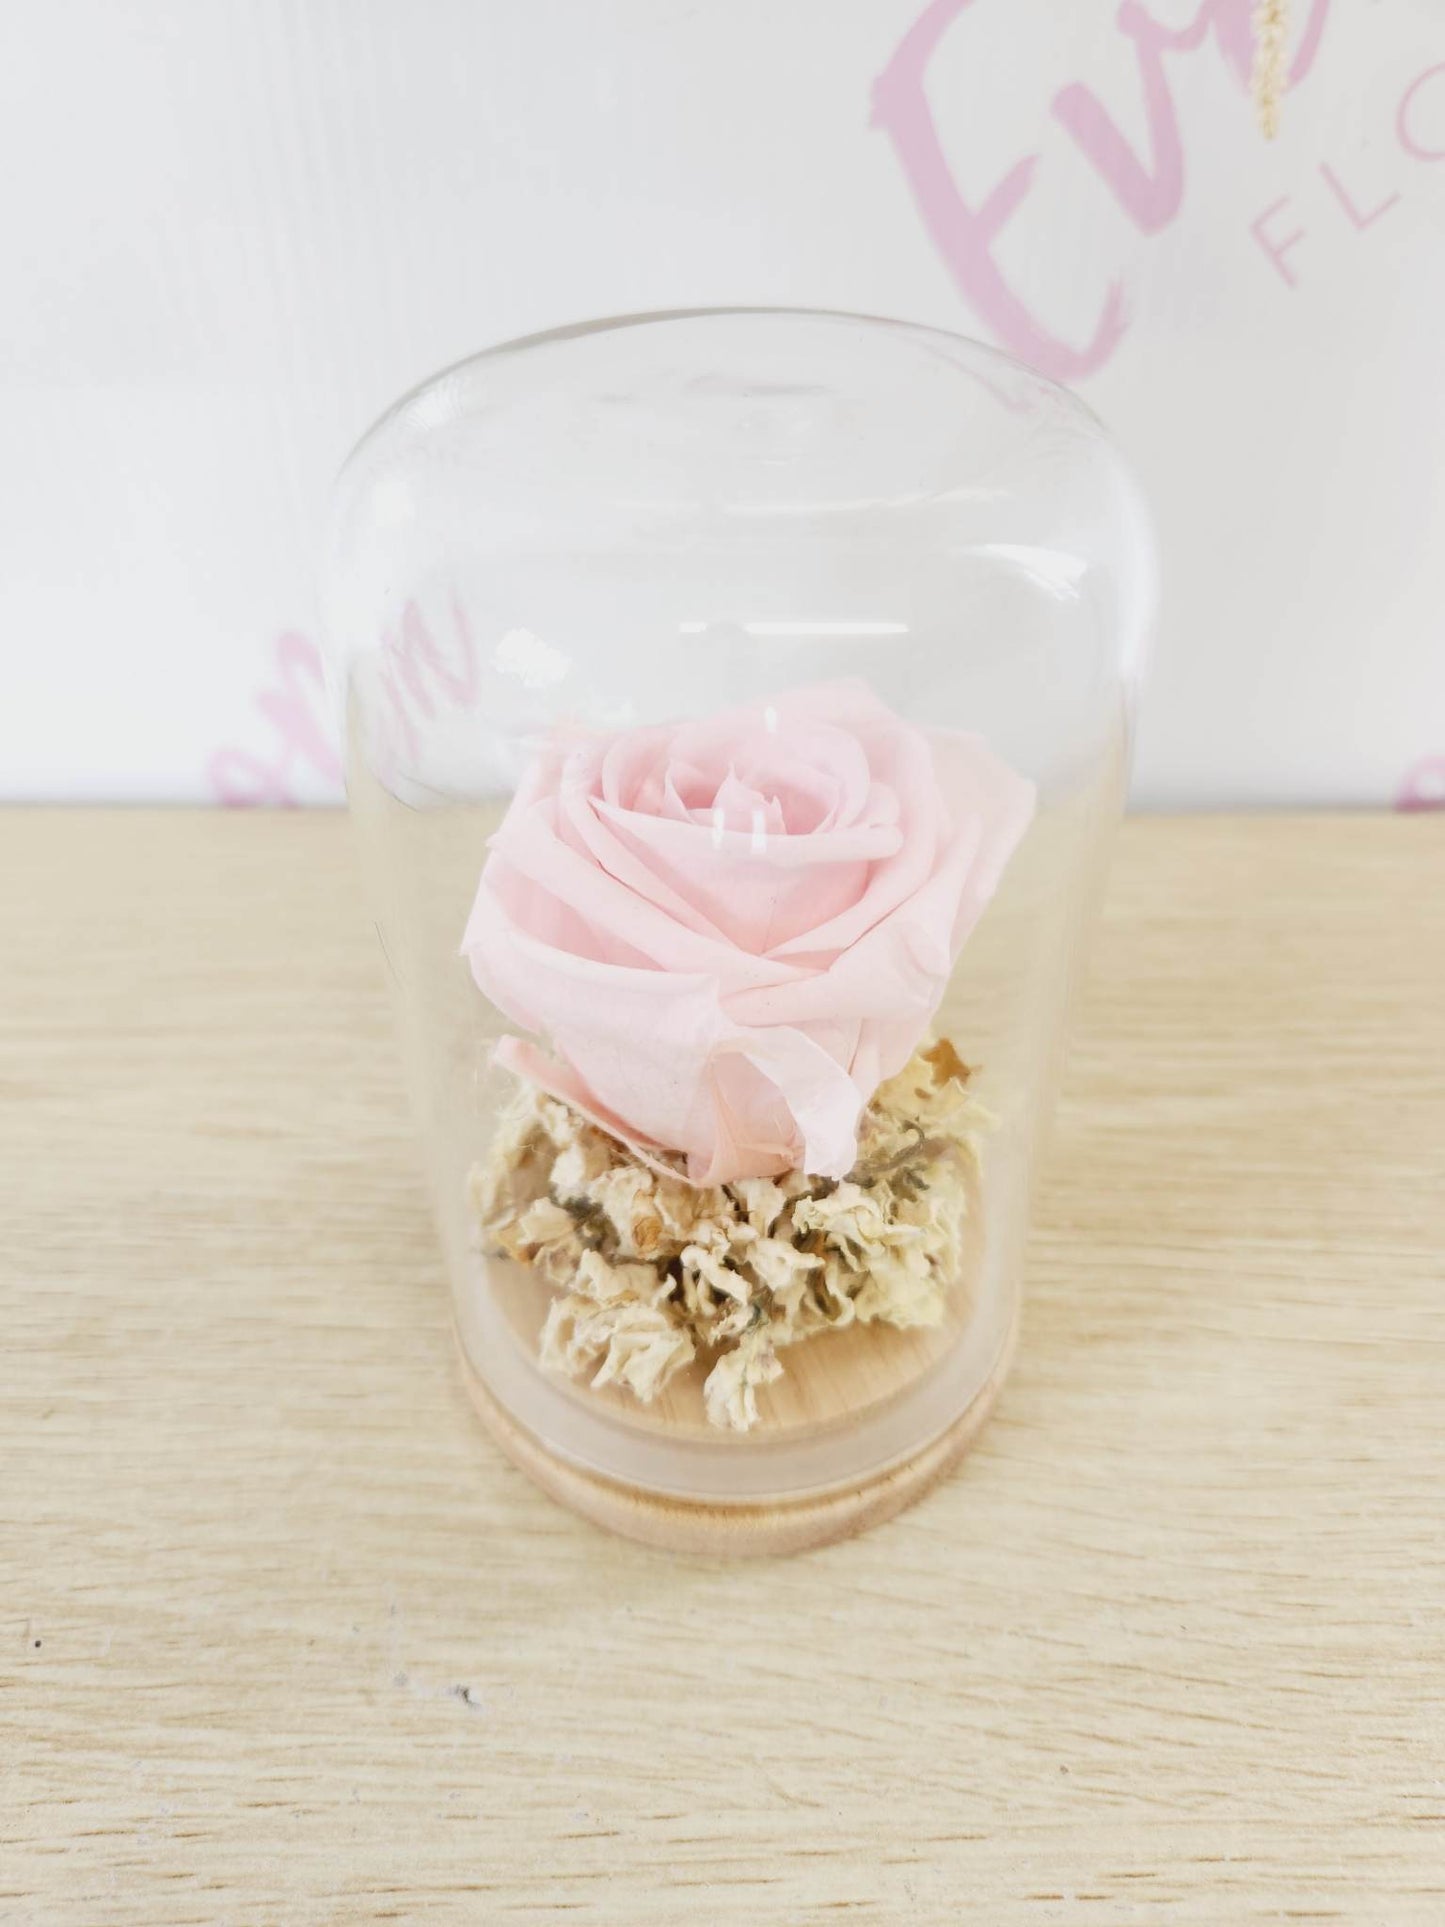 Preserved pink rose - Everbloom floral studio. Papamoa and Mount Maunganui florist